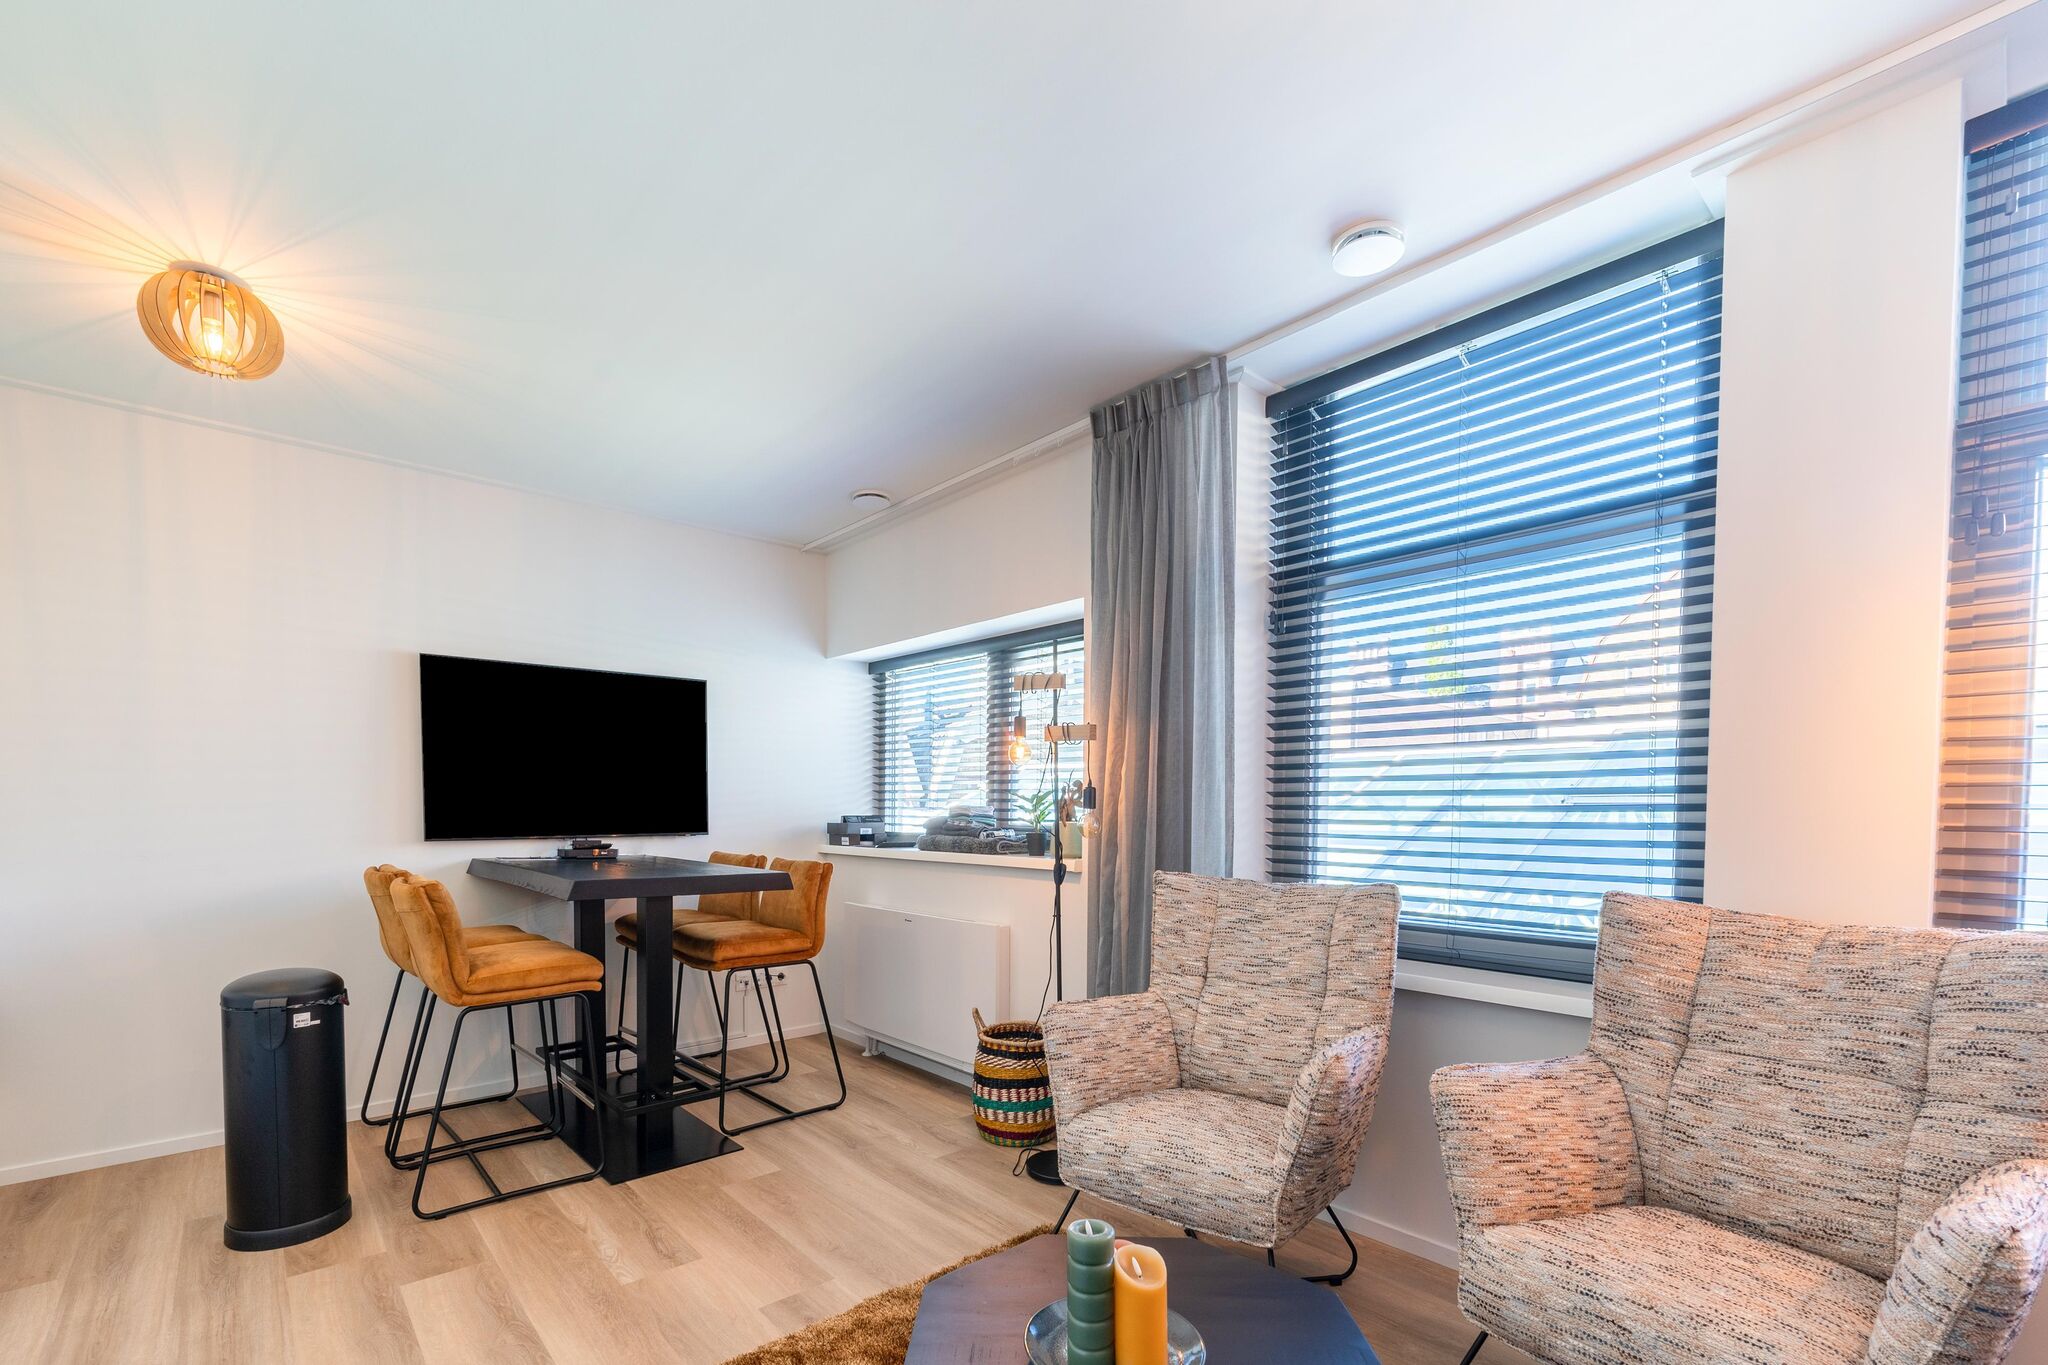 2 adjacent apartments in the heart of Sneek